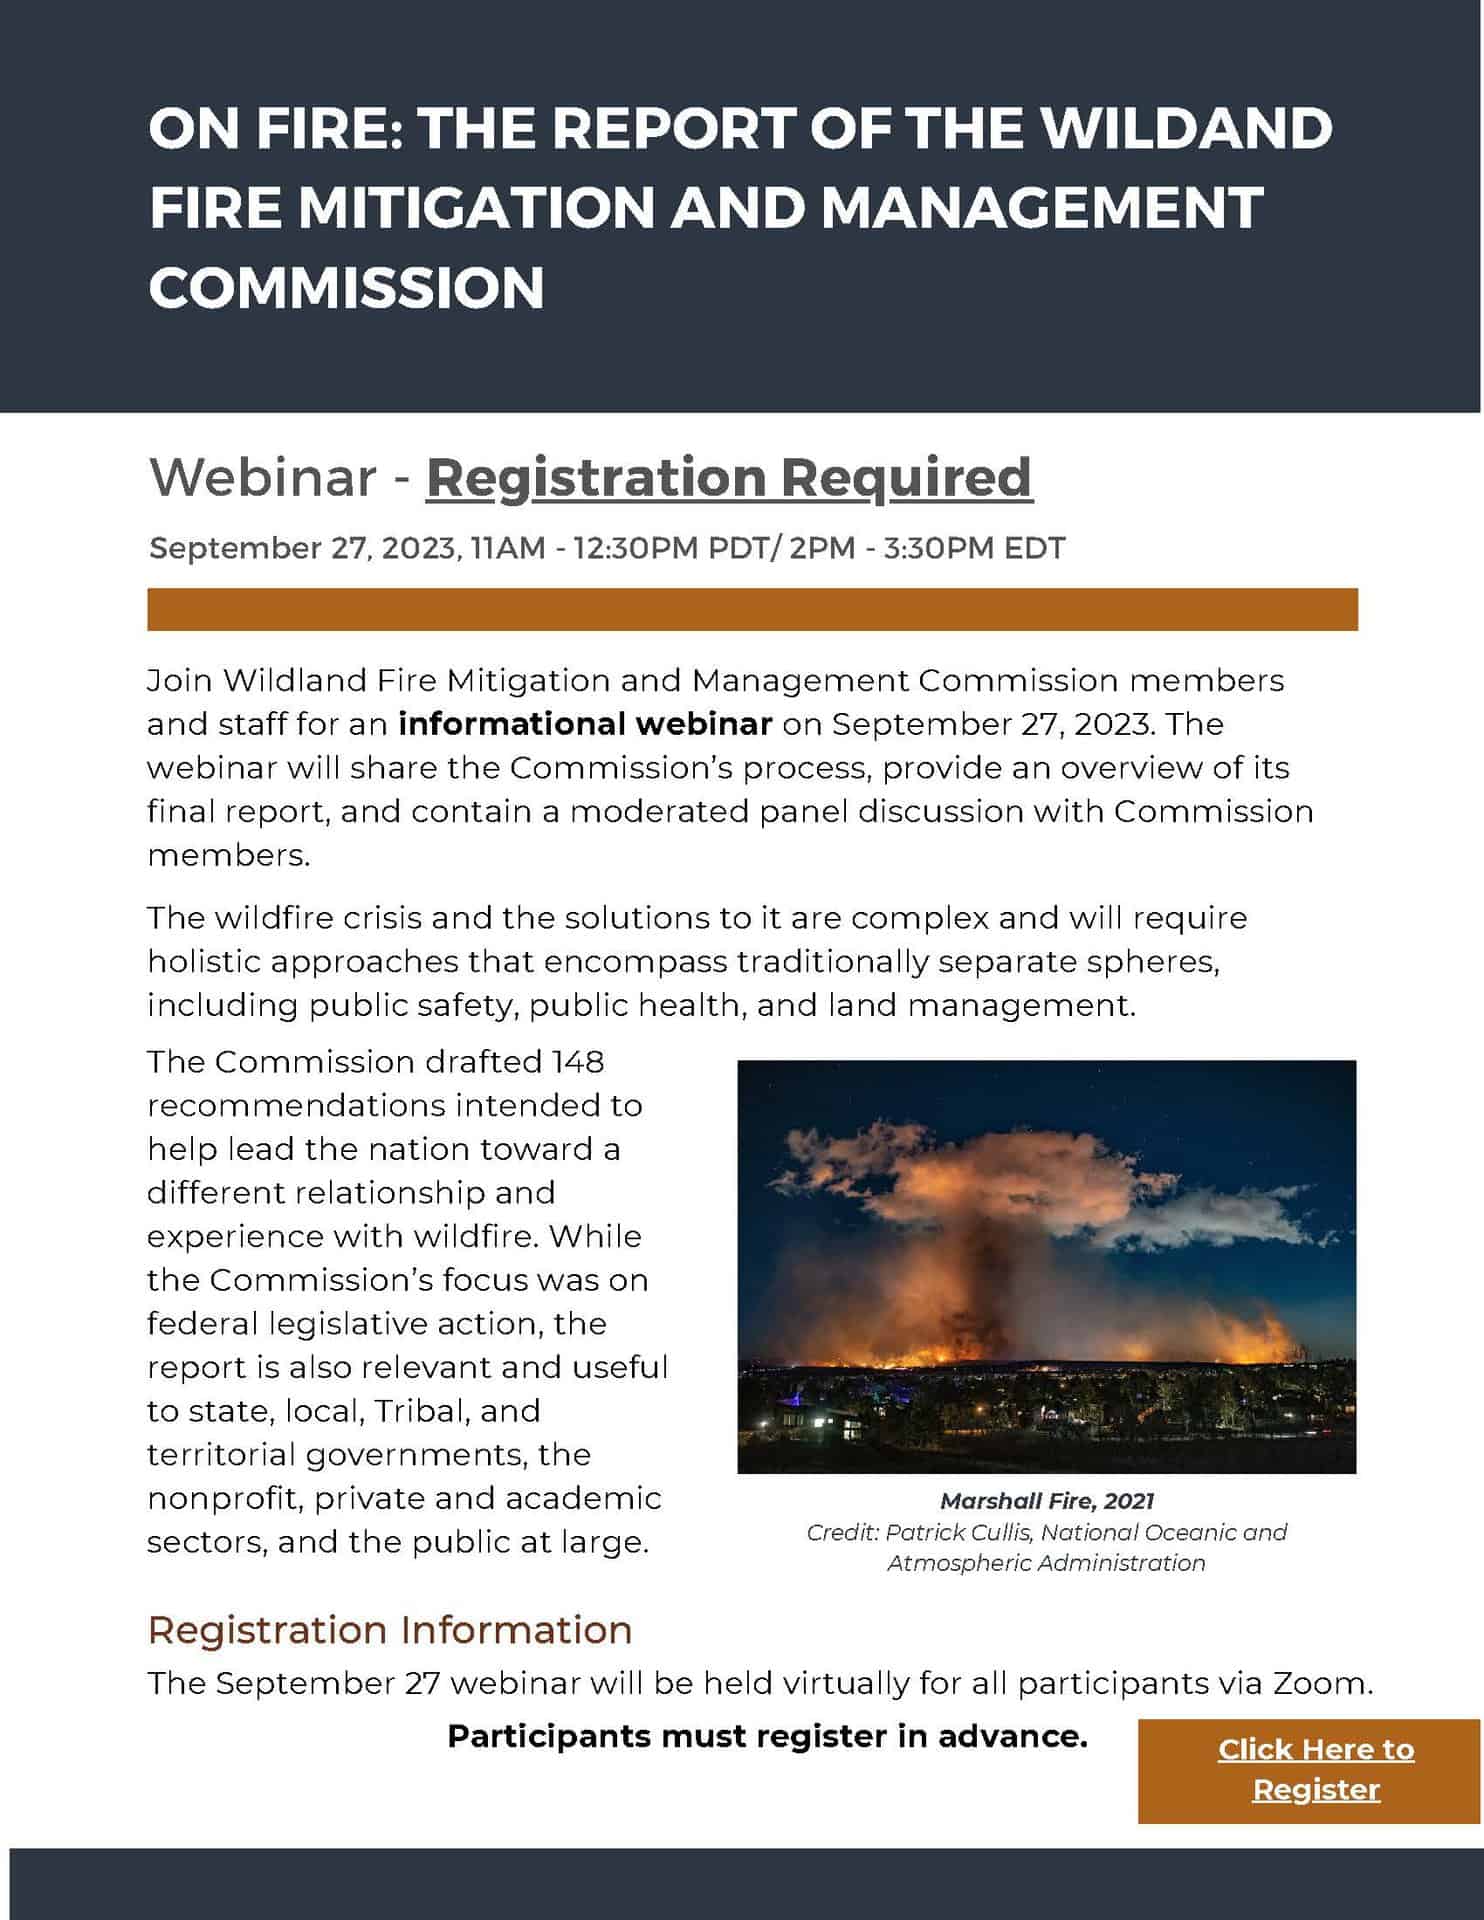 Partner Webinar Series: Integrating Public Health into Forest and Fire  Management — Association for Fire Ecology